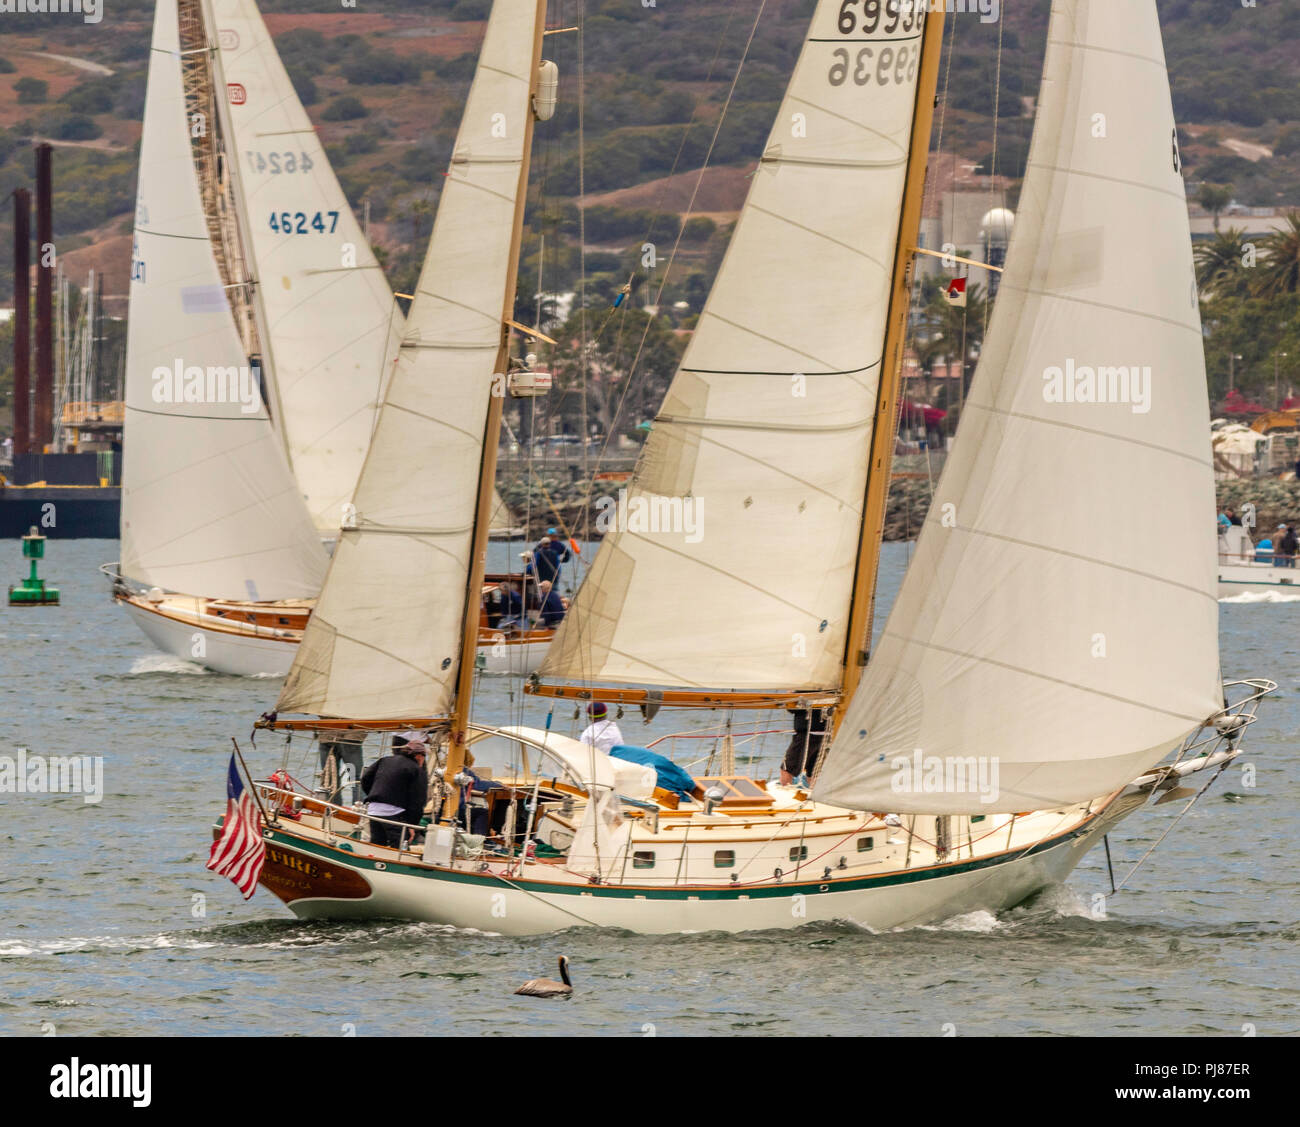 Two classic yachts working upwind Stock Photo